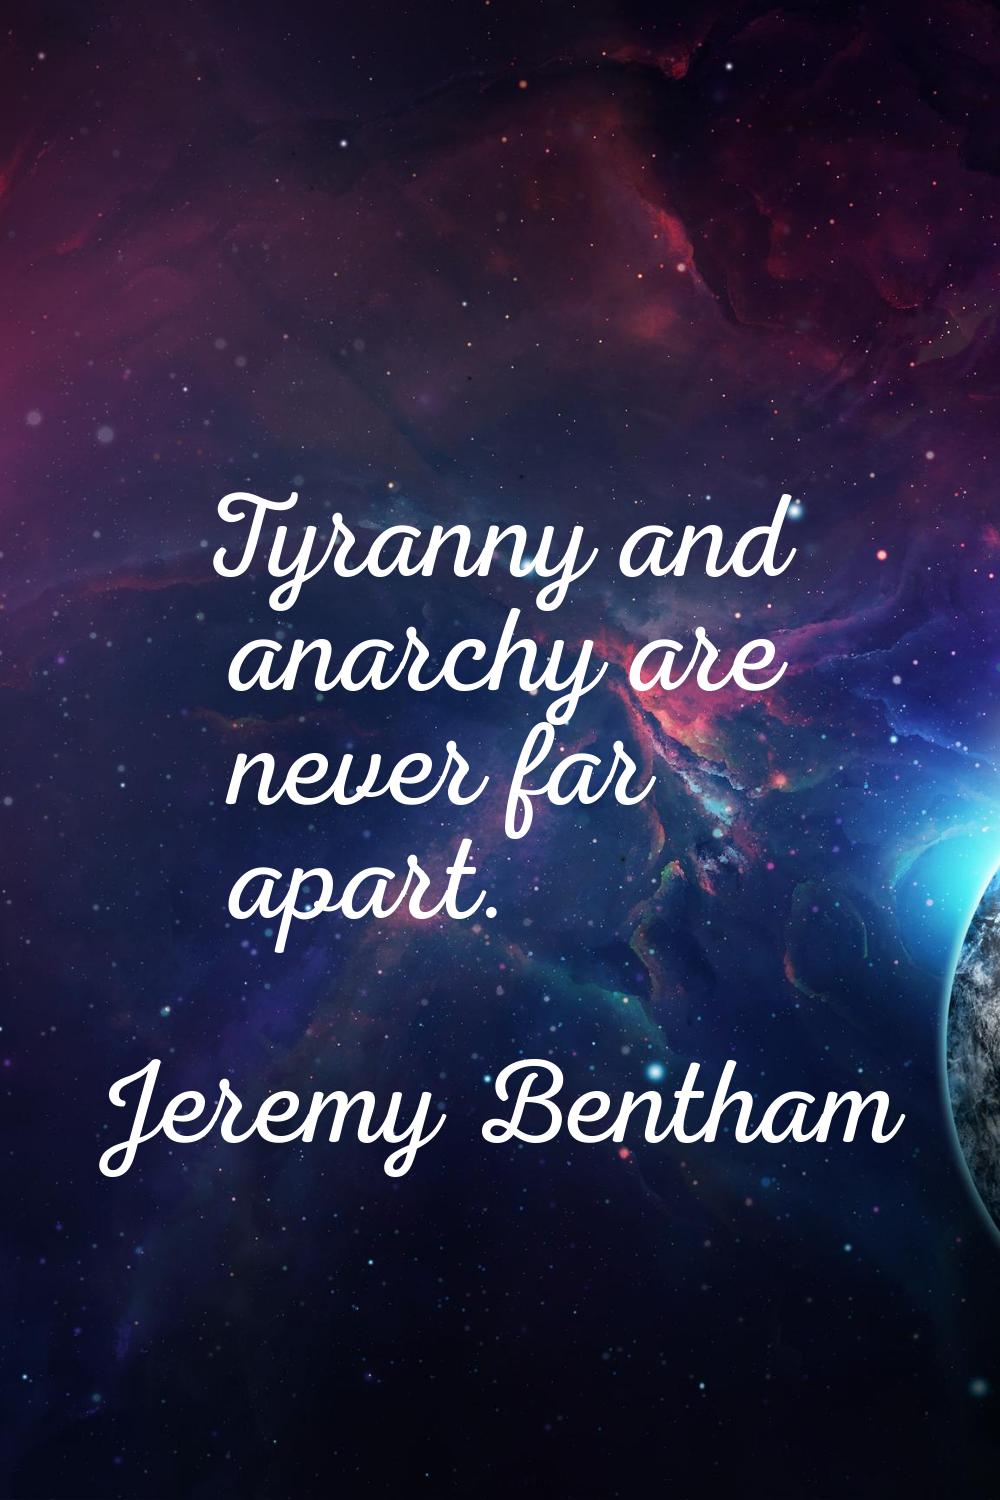 Tyranny and anarchy are never far apart.